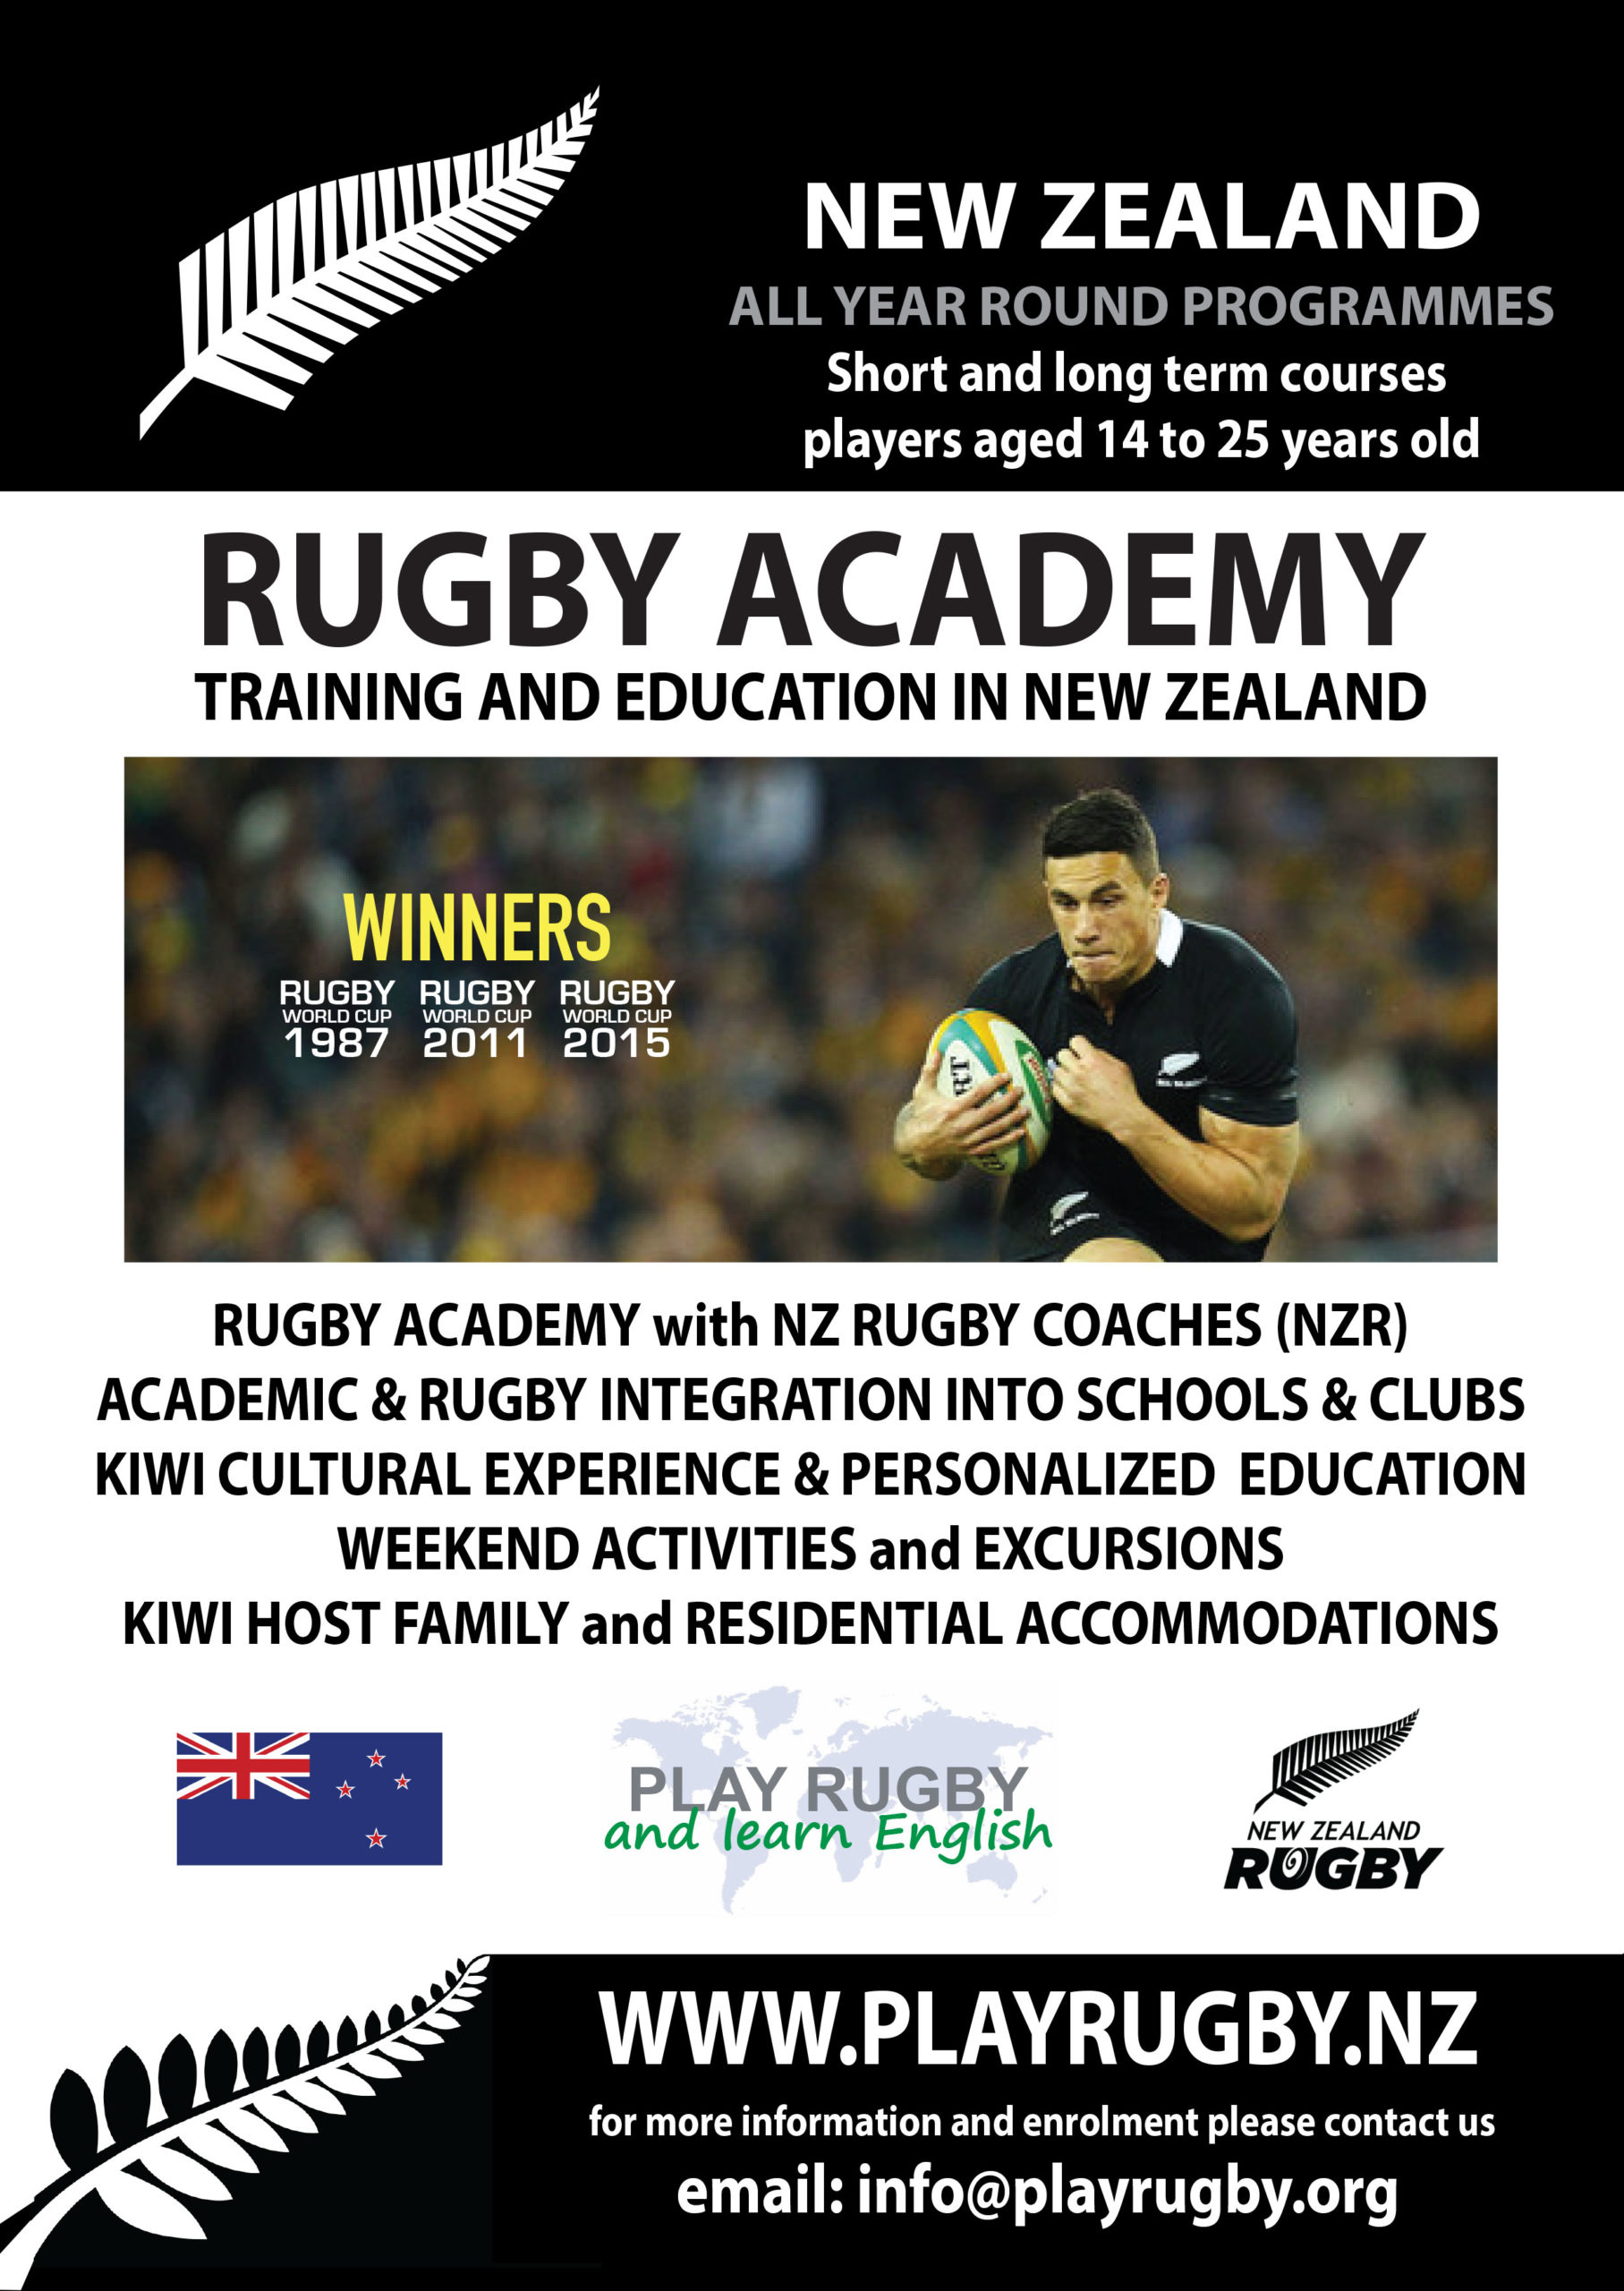 English and Rugby Summer Camps, Play Rugby and learn English